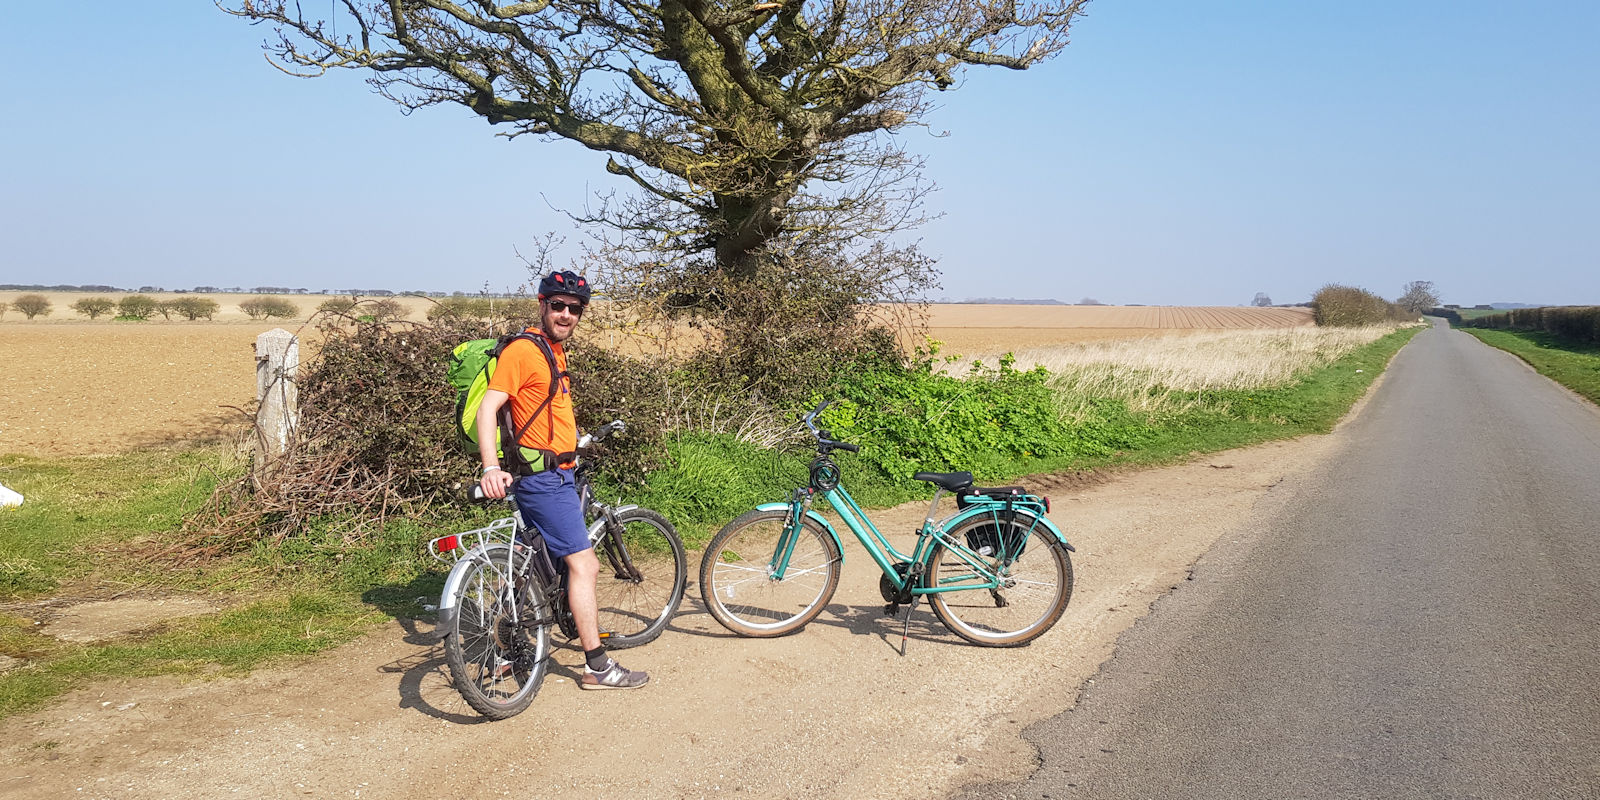 North Norfolk Cycling | Here is our guide to cycling in North Norfolk, a county that is not as flat as you expect, but has wonderful cycling routes, beautiful villages, towns, beaches, coastline & countryside, with lots of great pubs, cafes & restaurants along the way.